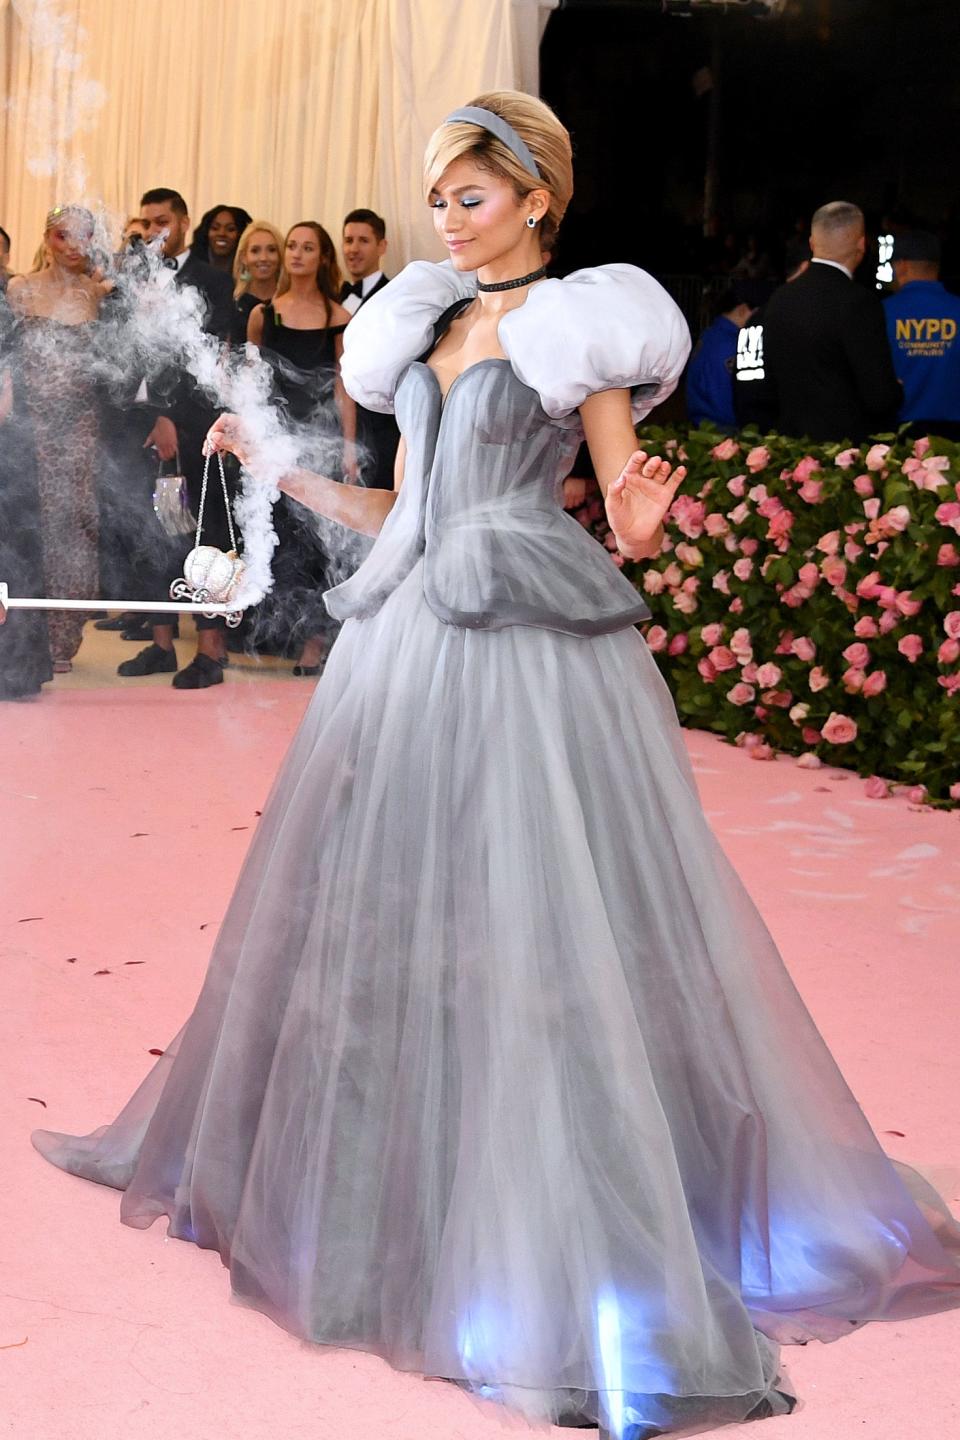 Zendaya in a light grey gown with a lit-up glass slipper, person in a blue costume with a wand